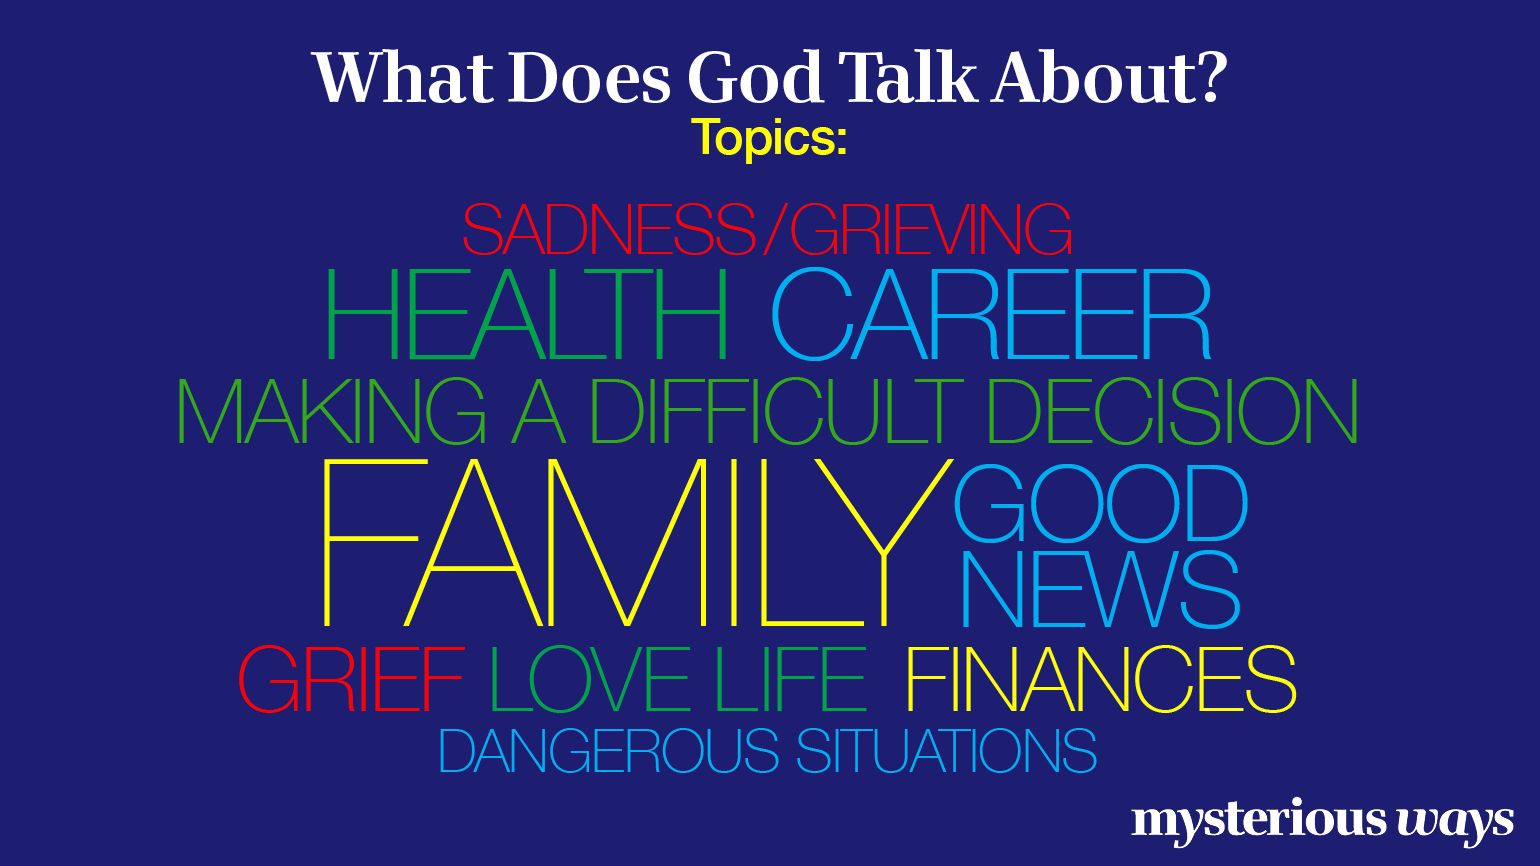 What Does God Talk About? Topics?